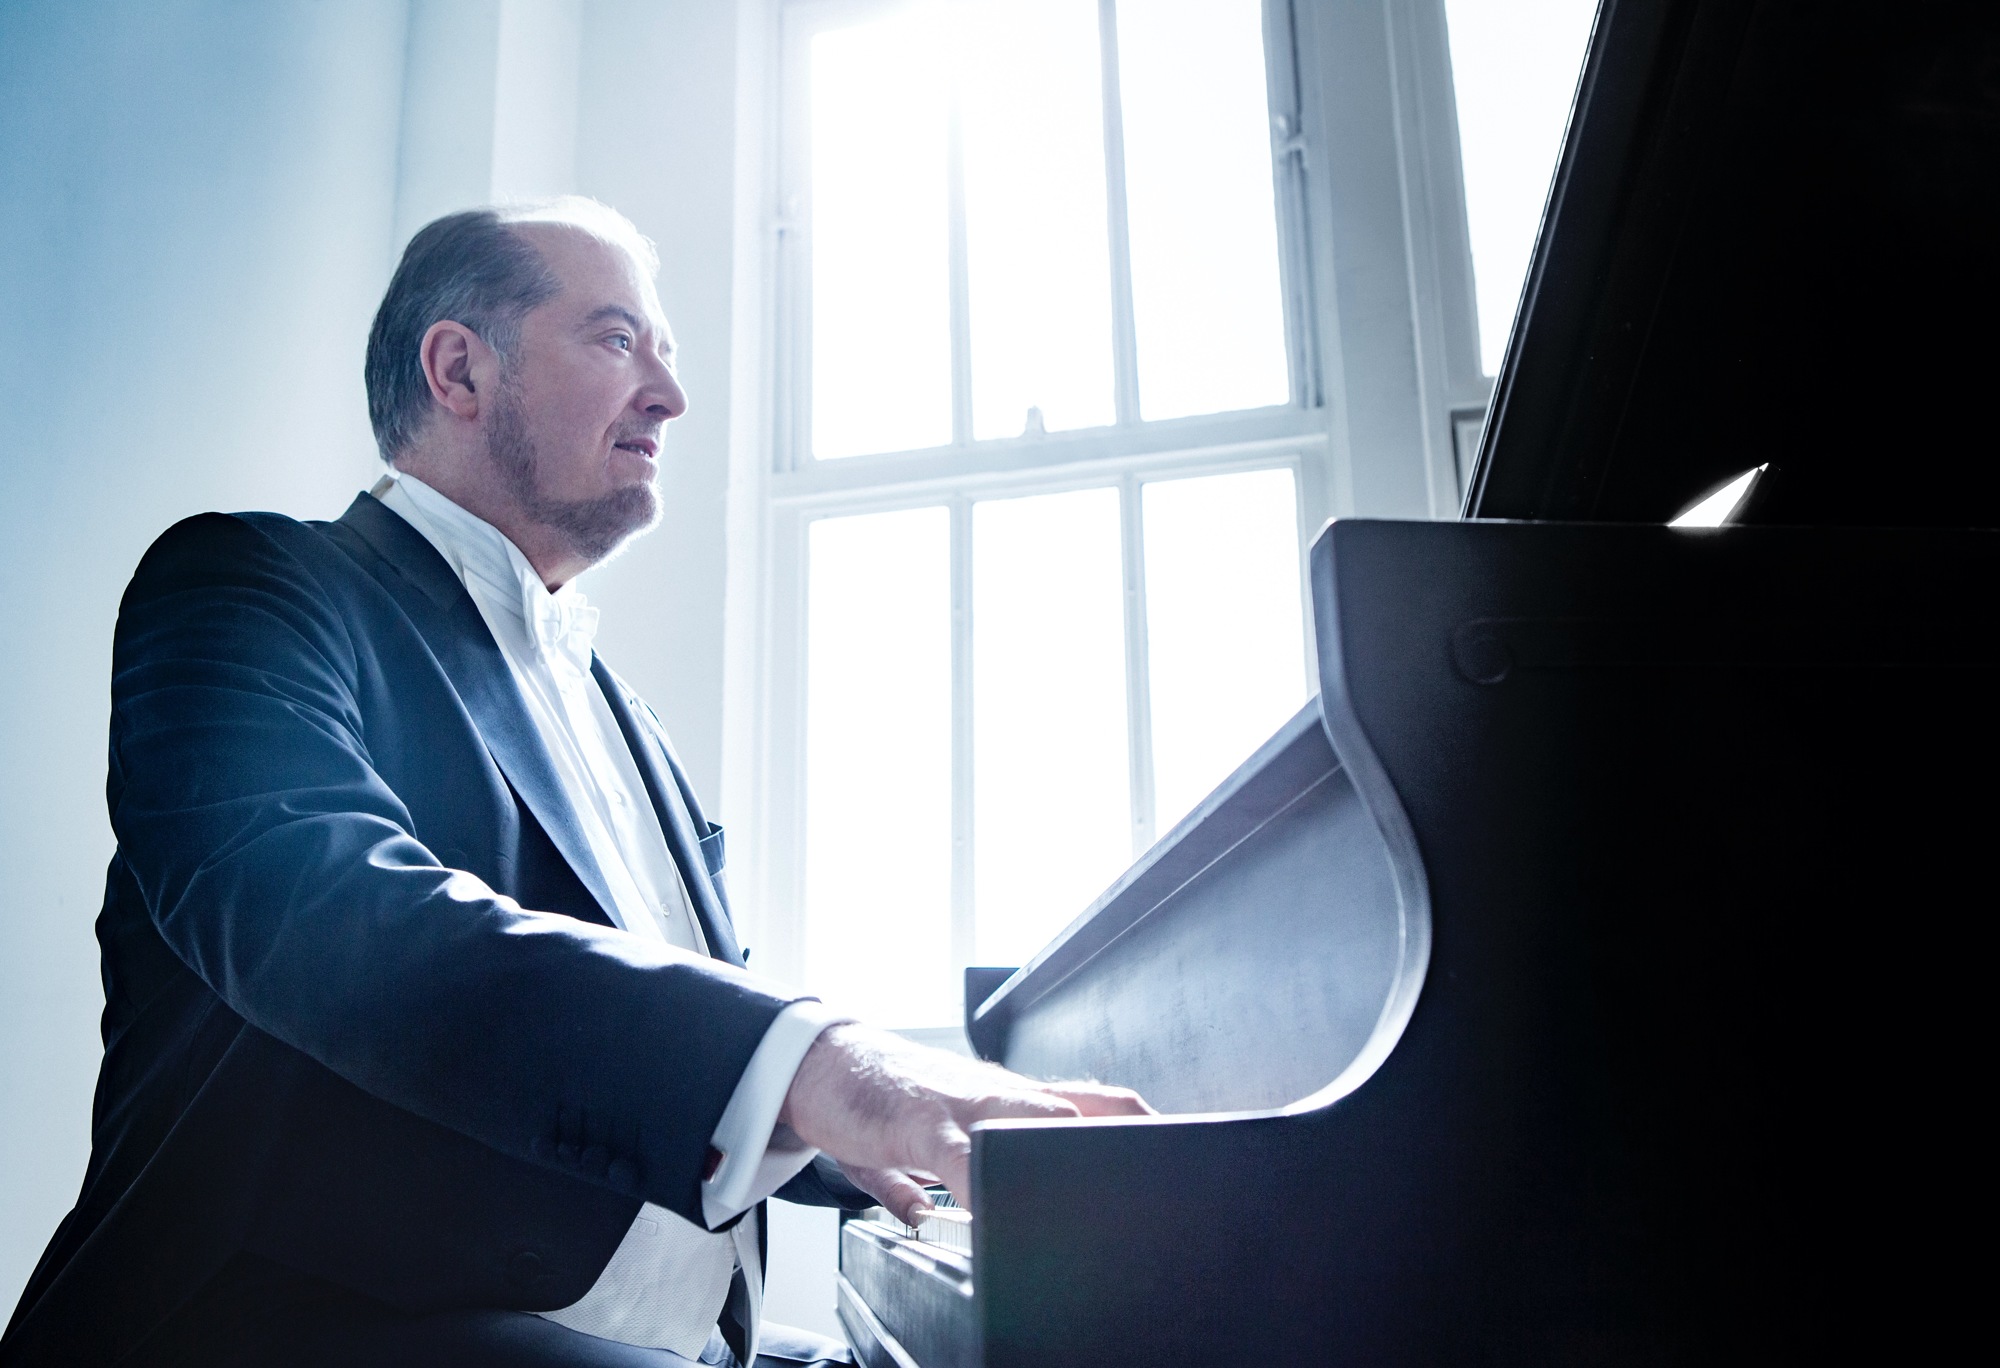 Legendary pianist Garrick Ohlsson will play a challenging concerto by Rachmaninoff.